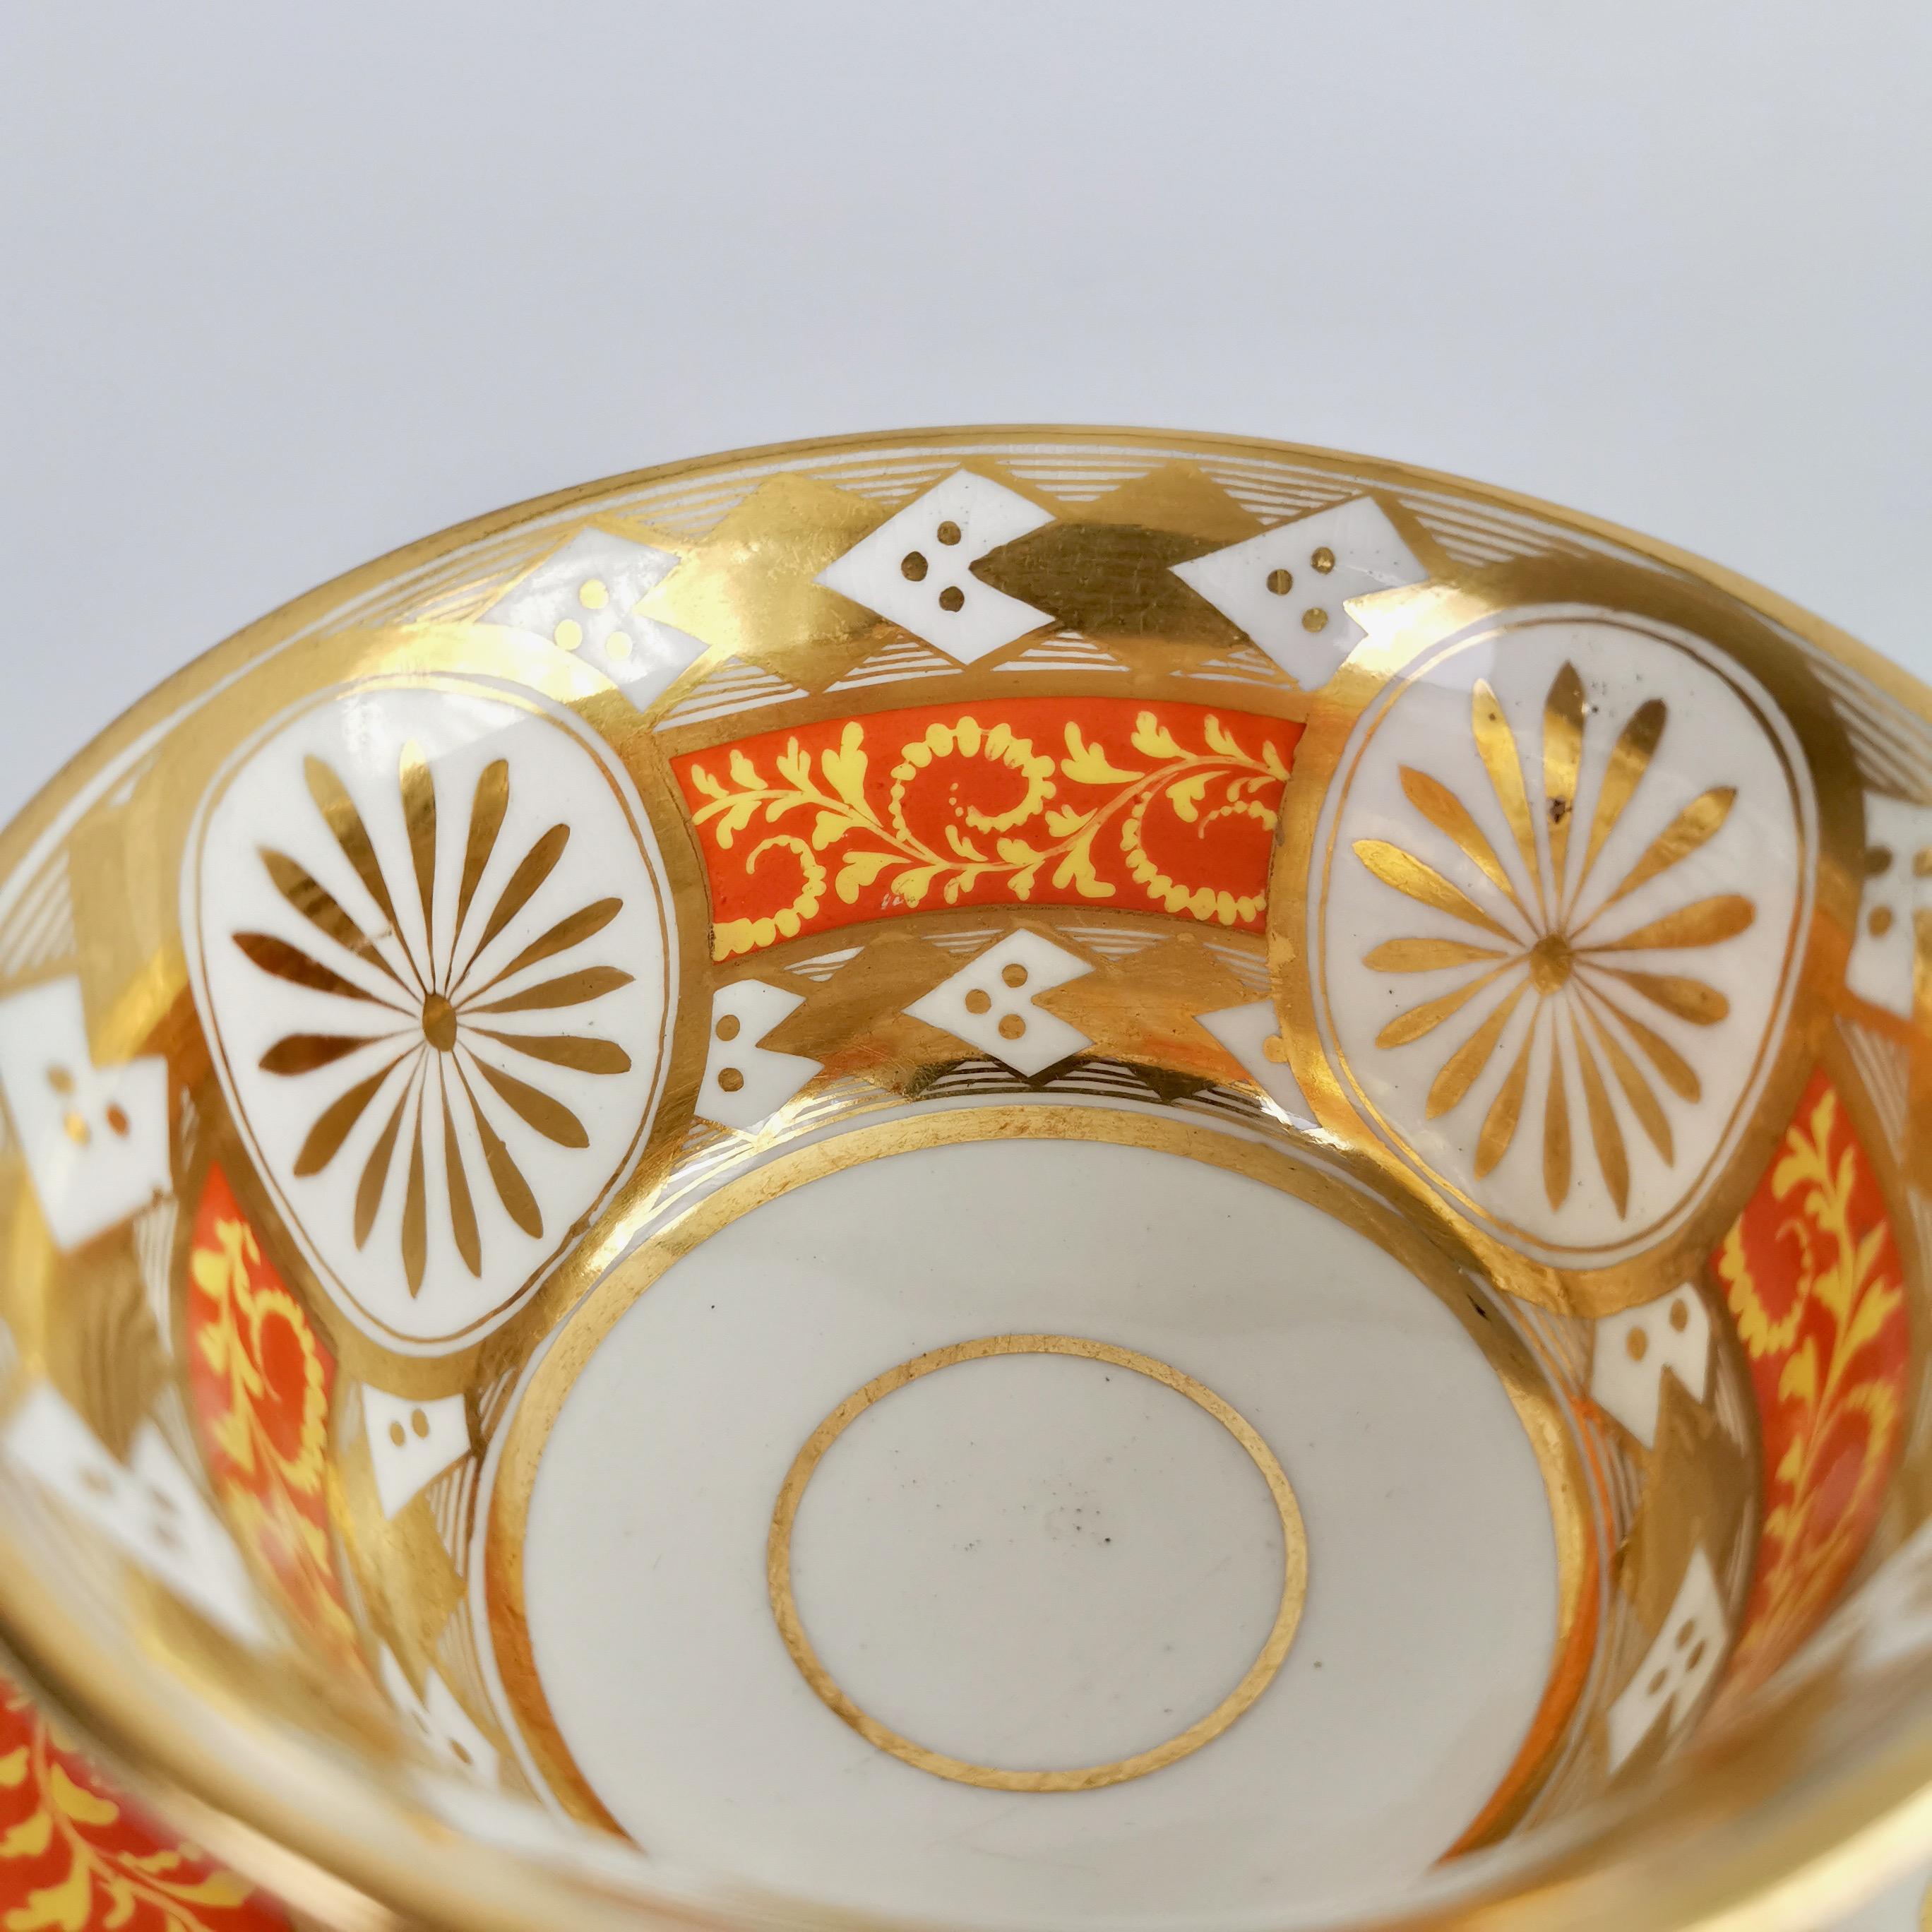 Anstice, Horton & Rose Teacup, Geometric Gilt, Yellow and Red, Regency 3